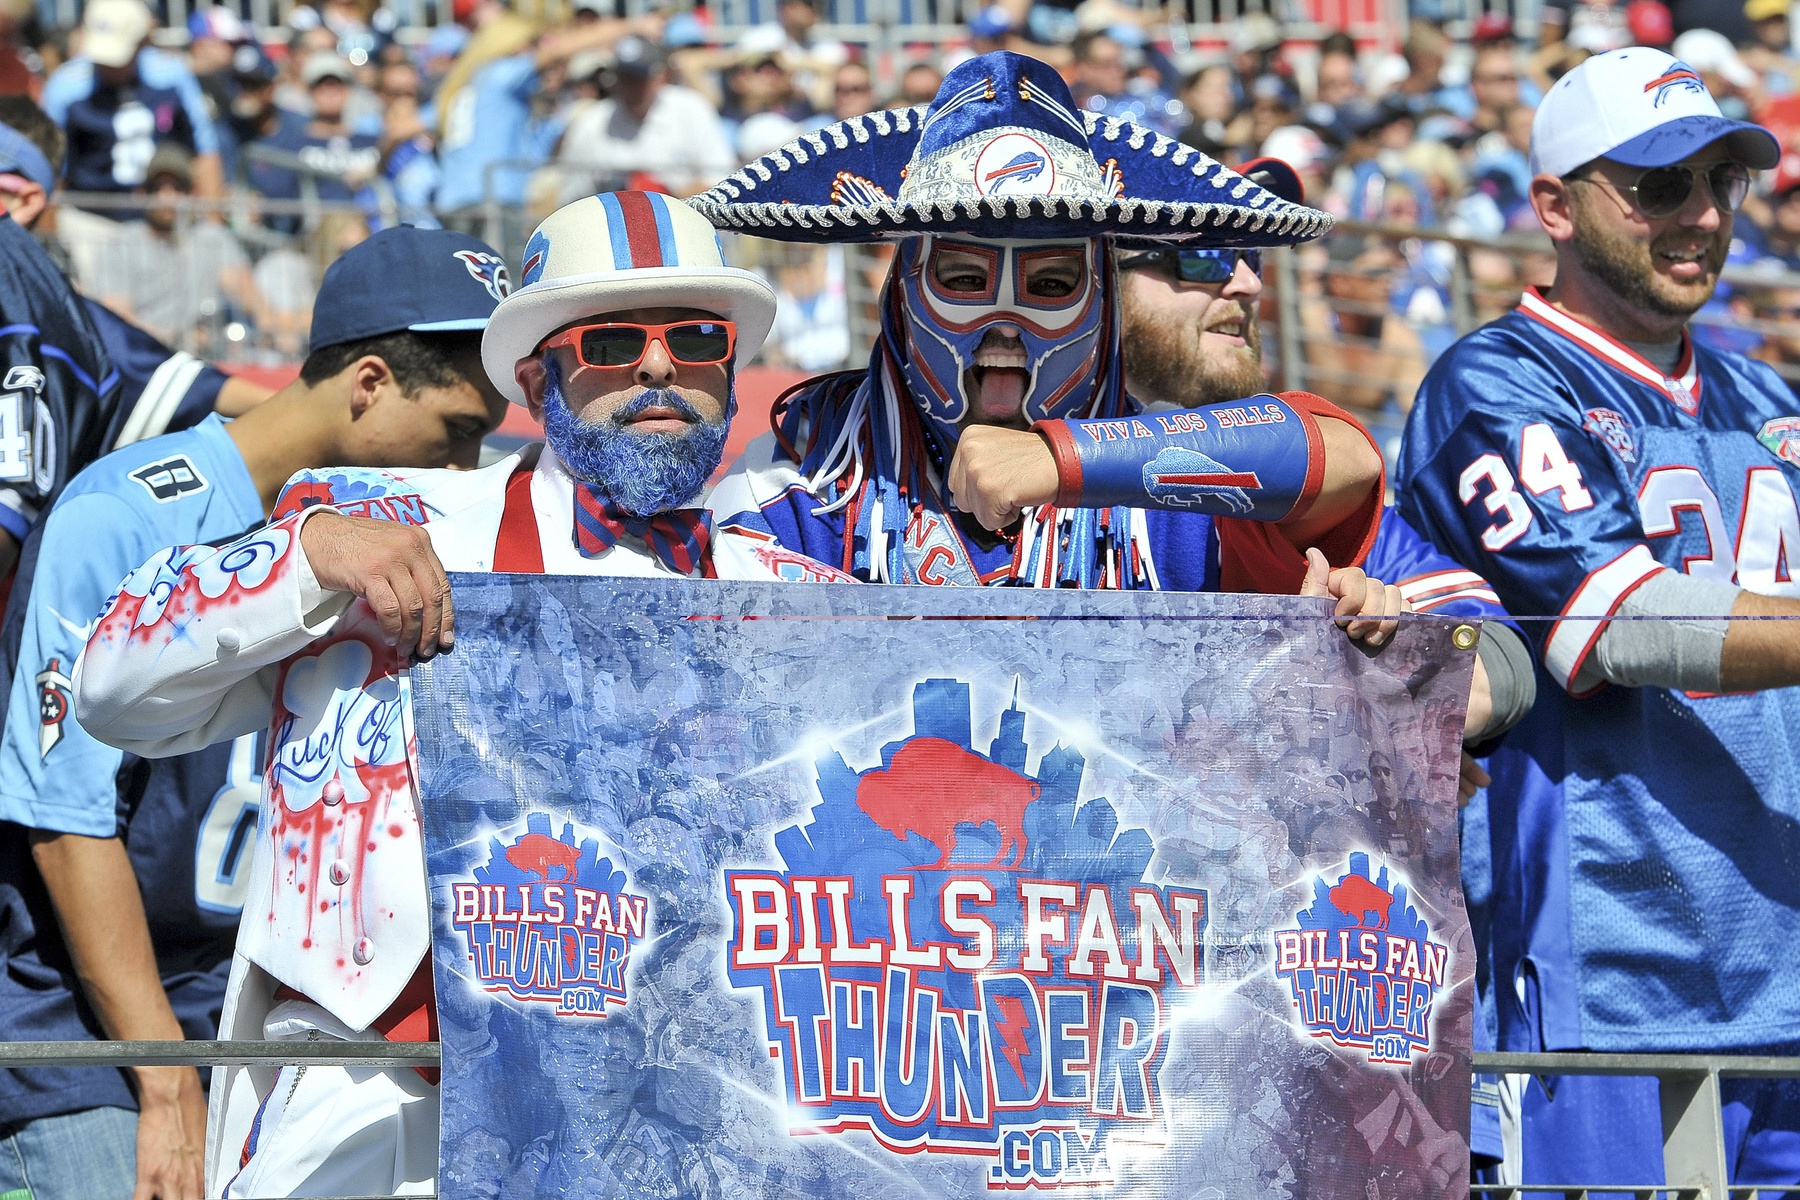 WATCH: Bills pay tribute to super fan who passed Tuesday